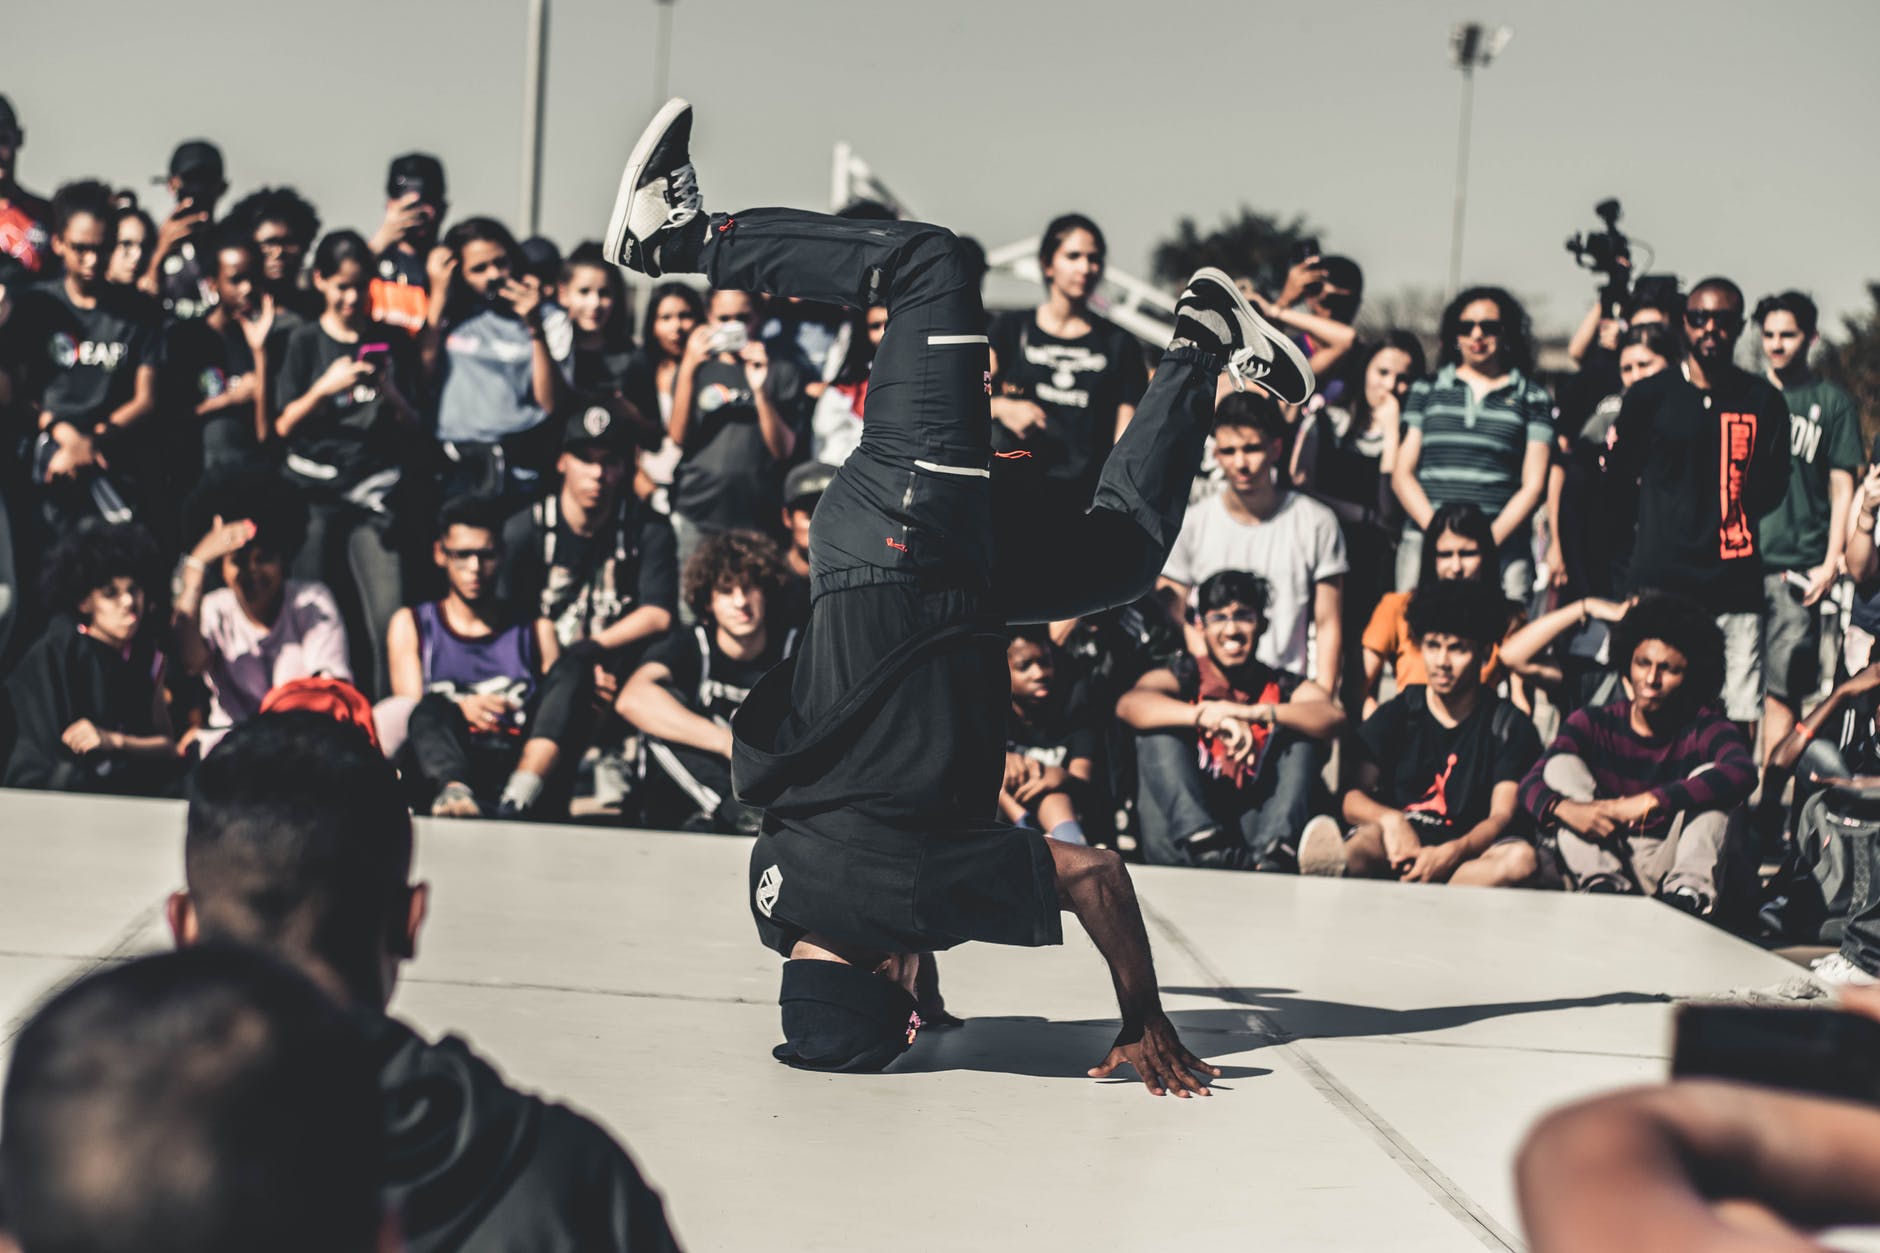 a man performing hip hop dance in front of the crowd